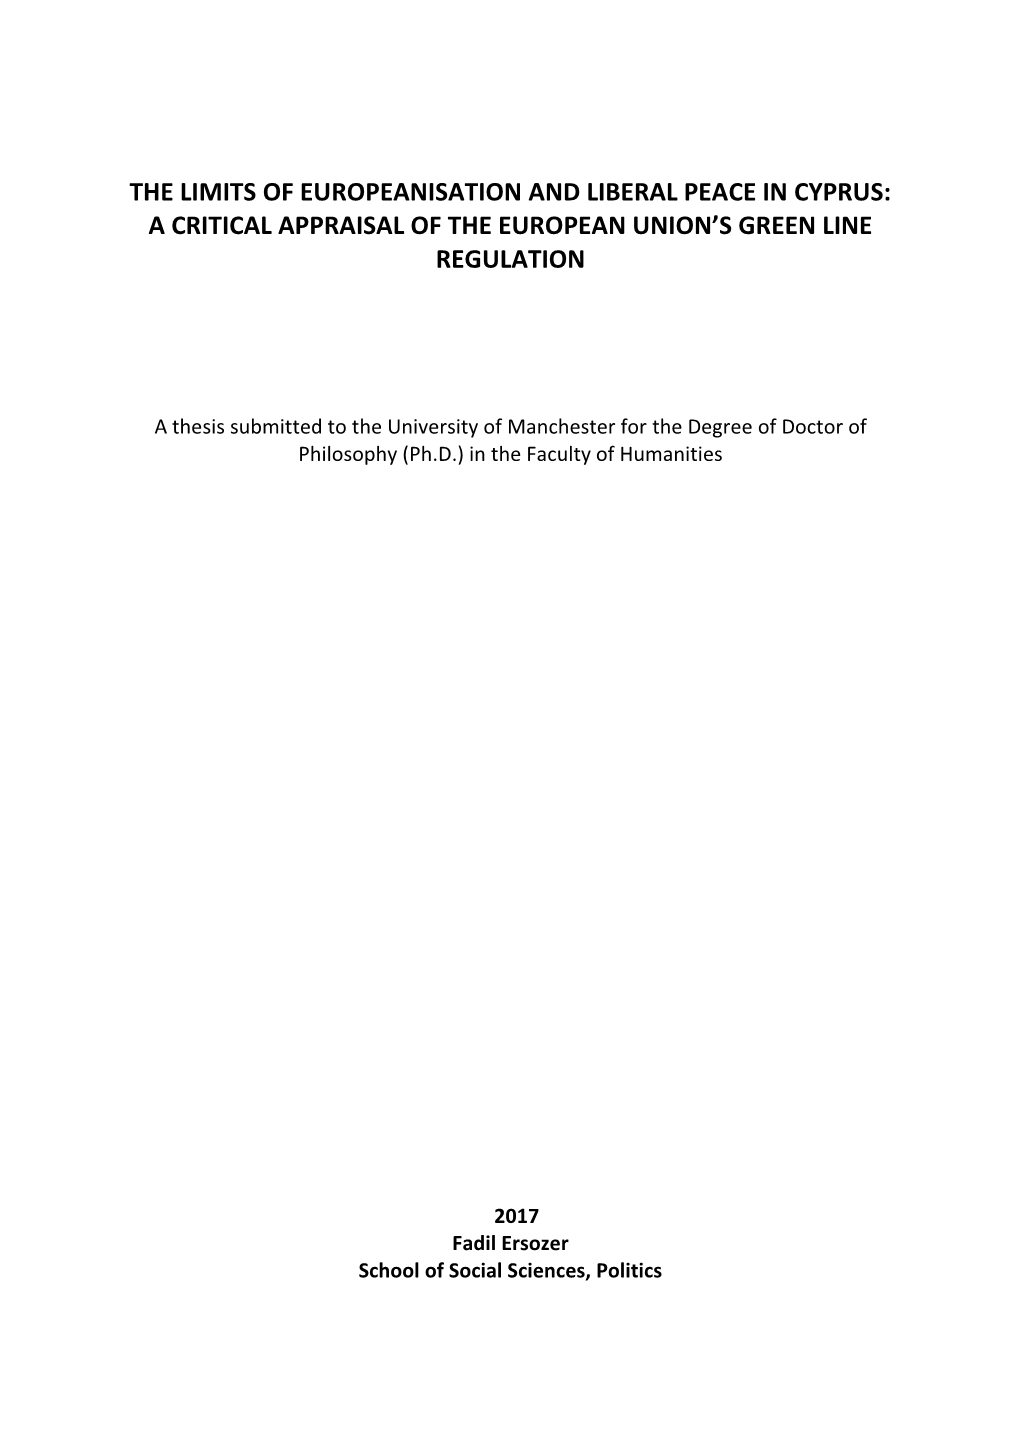 The Limits of Europeanisation and Liberal Peace in Cyprus: a Critical Appraisal of the European Union’S Green Line Regulation